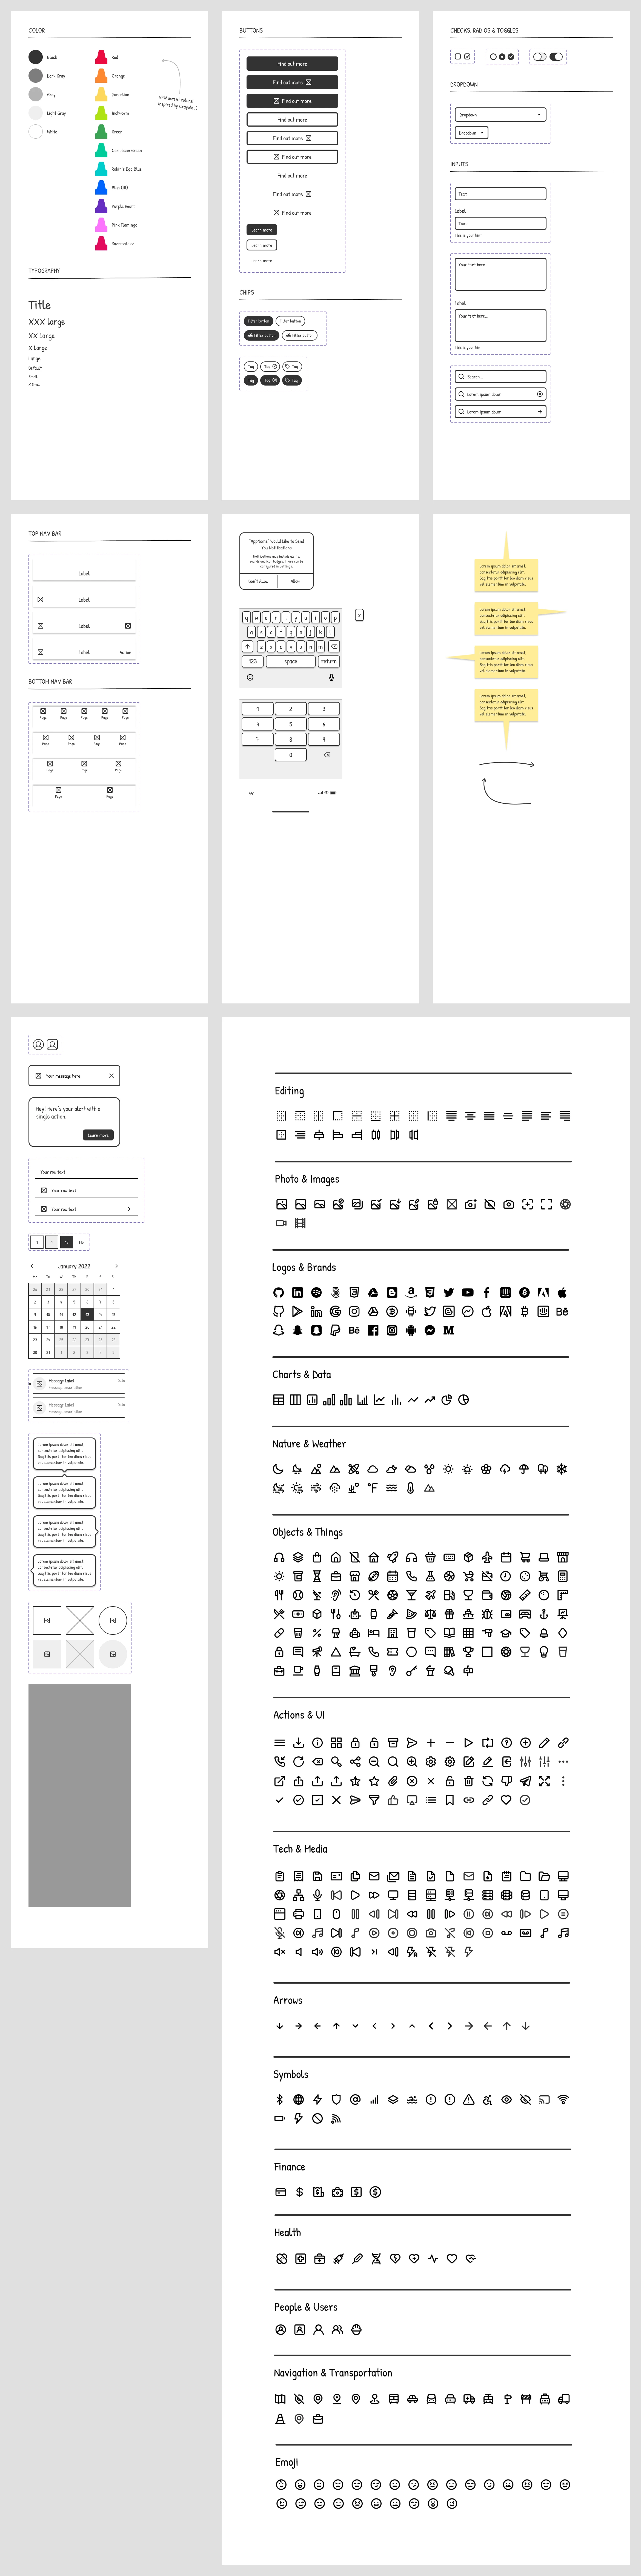 Paper Free Wireframe Kit for Figma - Jump into your next project and generate concepts quickly with this Lo-Fi wireframing kit. Inspired by the analog process of paper prototyping, each component has been crafted to take a backseat to the overall experience you're aiming to create.